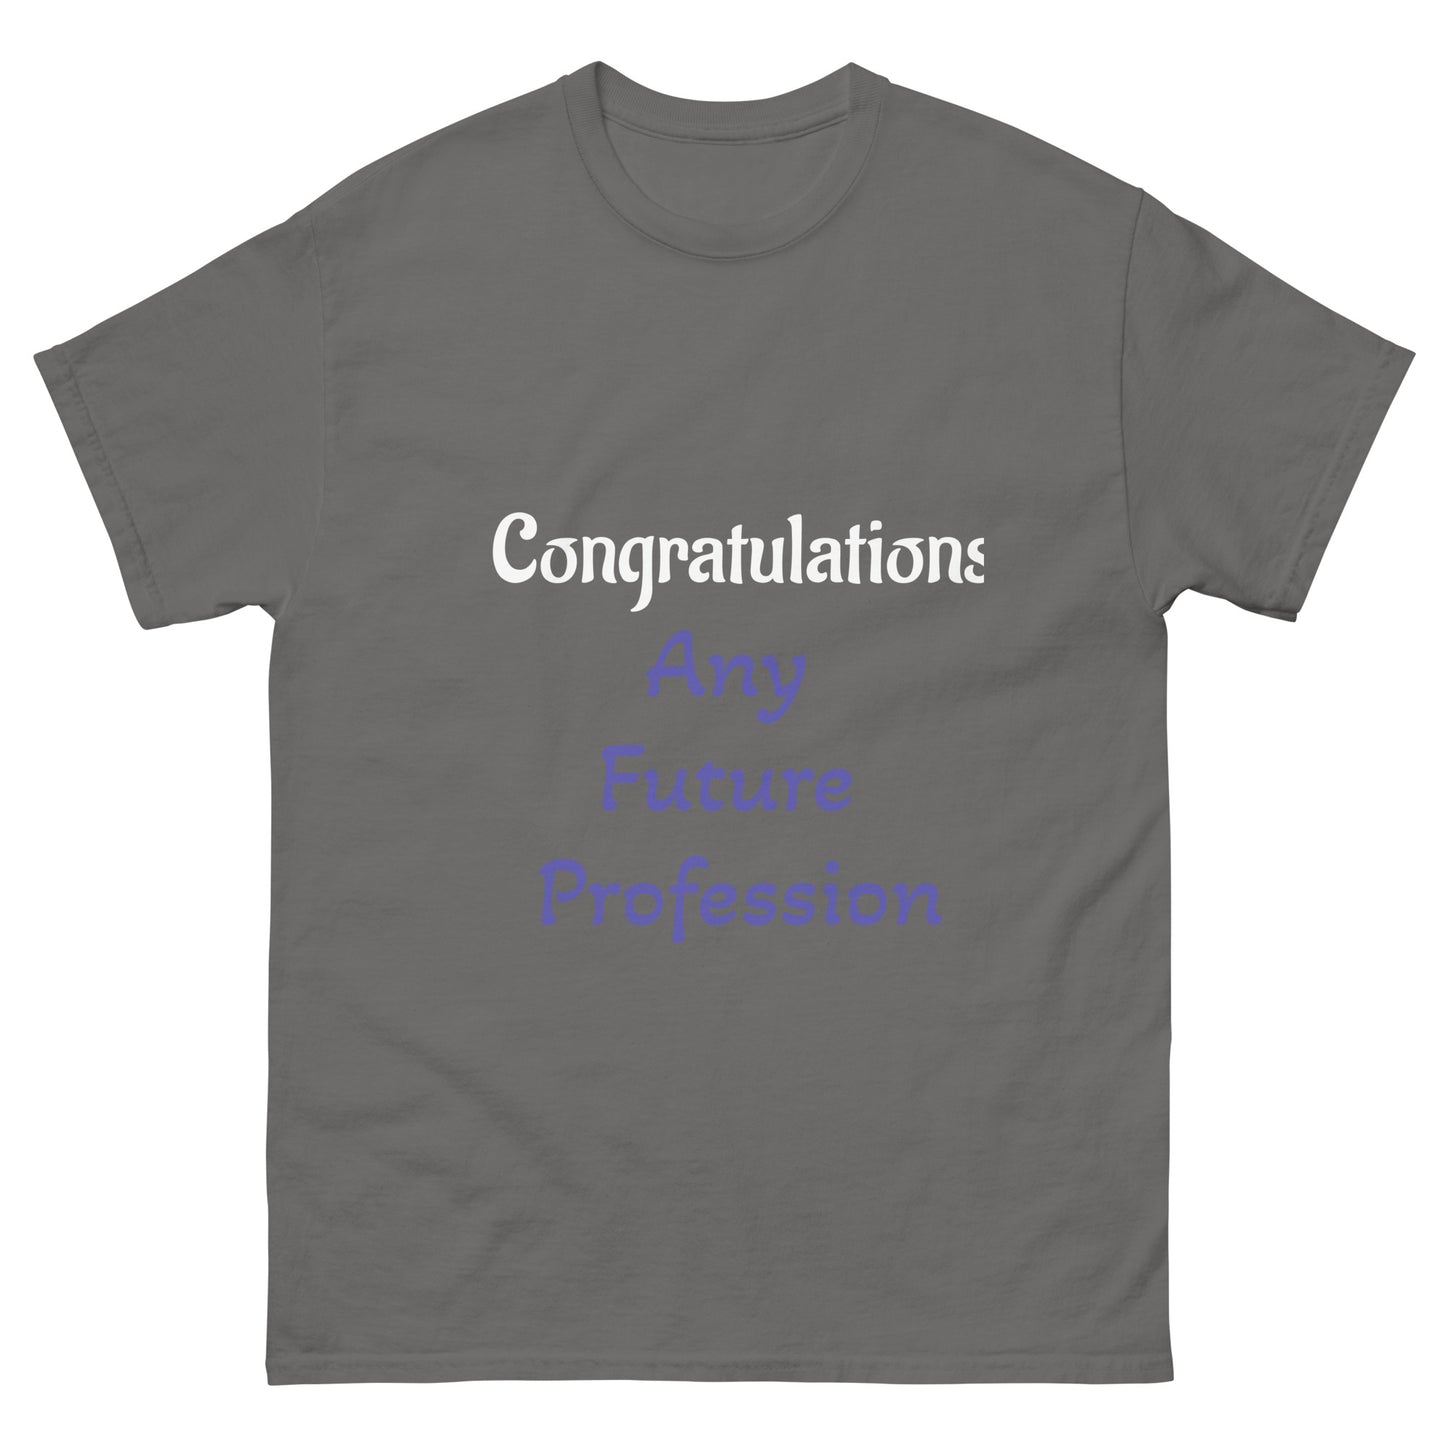 Personalised Congratulation T shirt Gift  for Any Future Profession